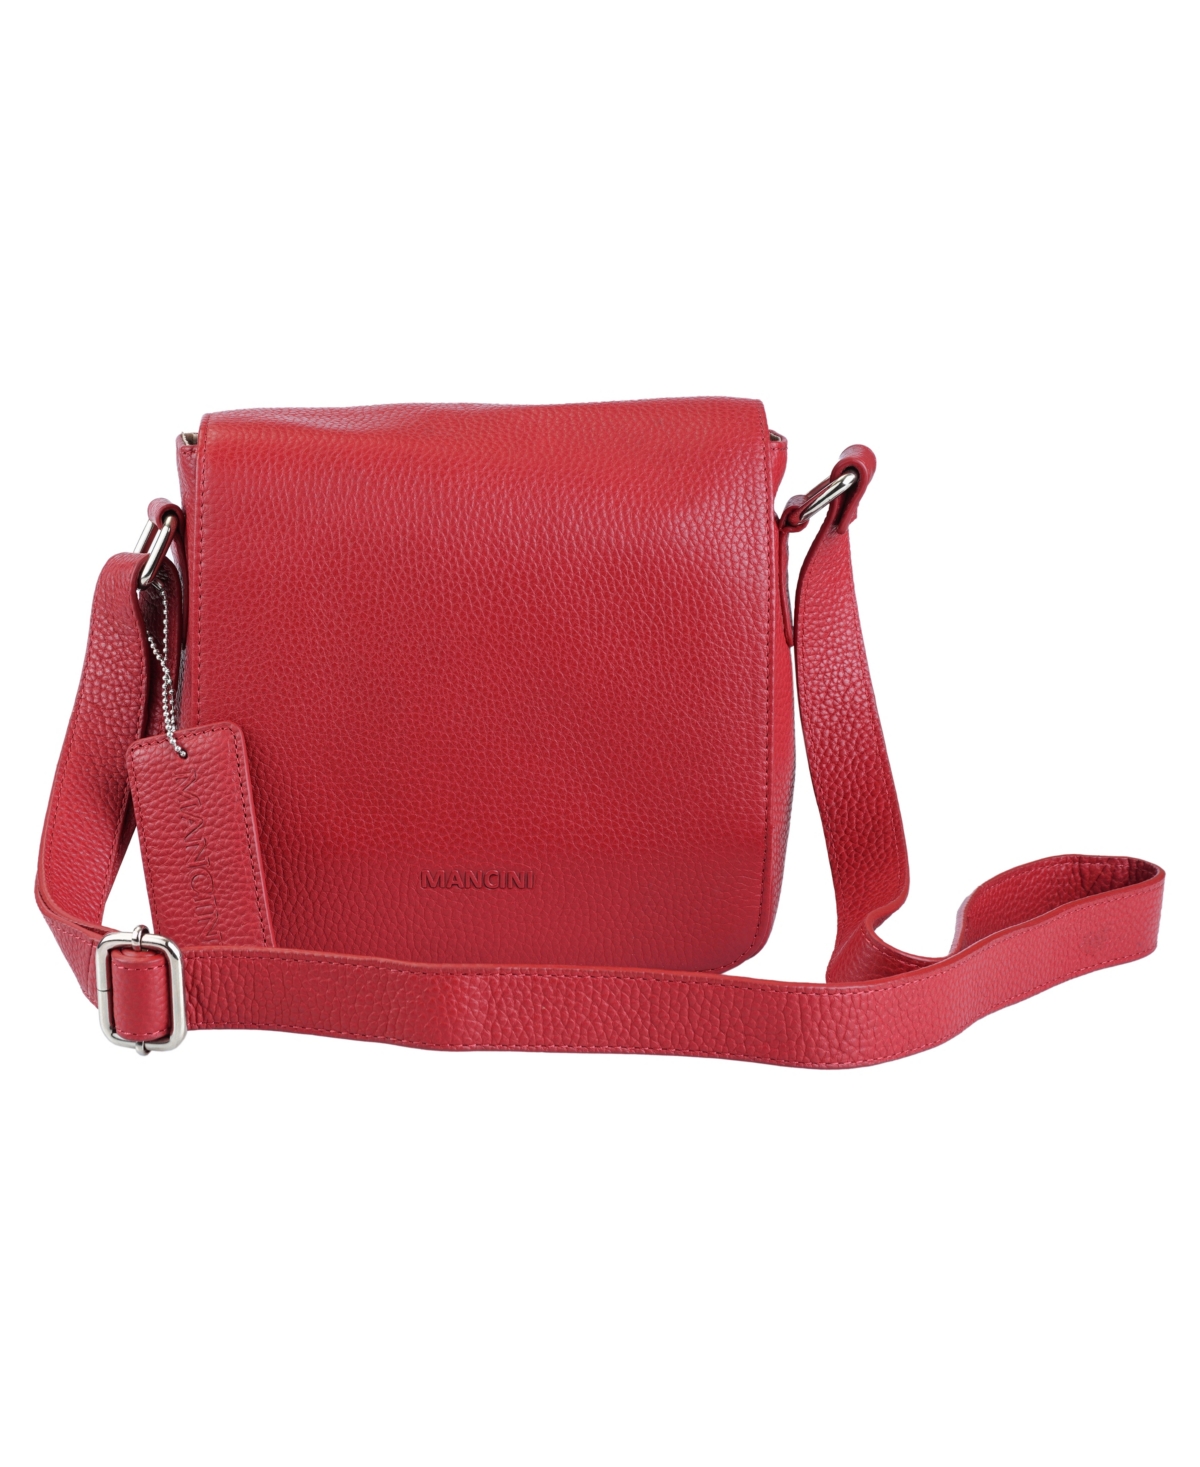 Mancini Pebbled Collection Page Leather Crossbody Bag In Red